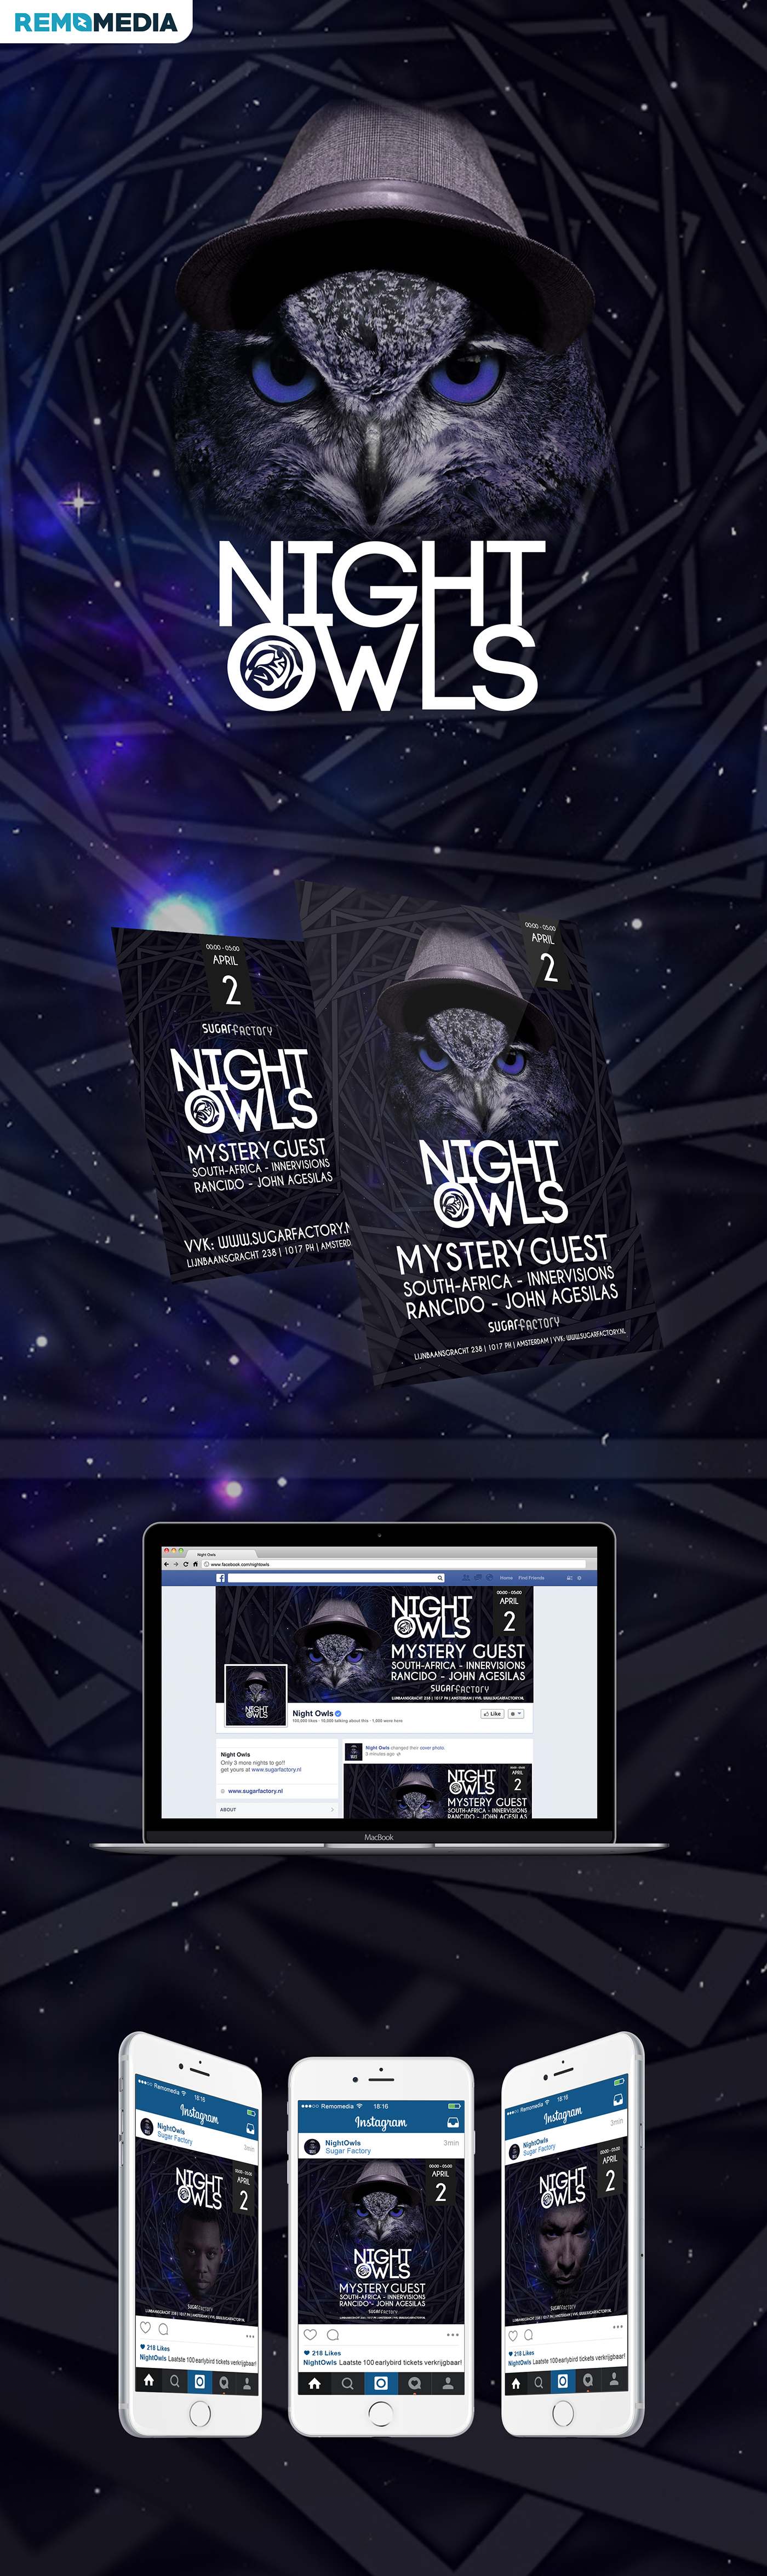 night owls graphic design campagne Netherlands amsterdam Remomedia party